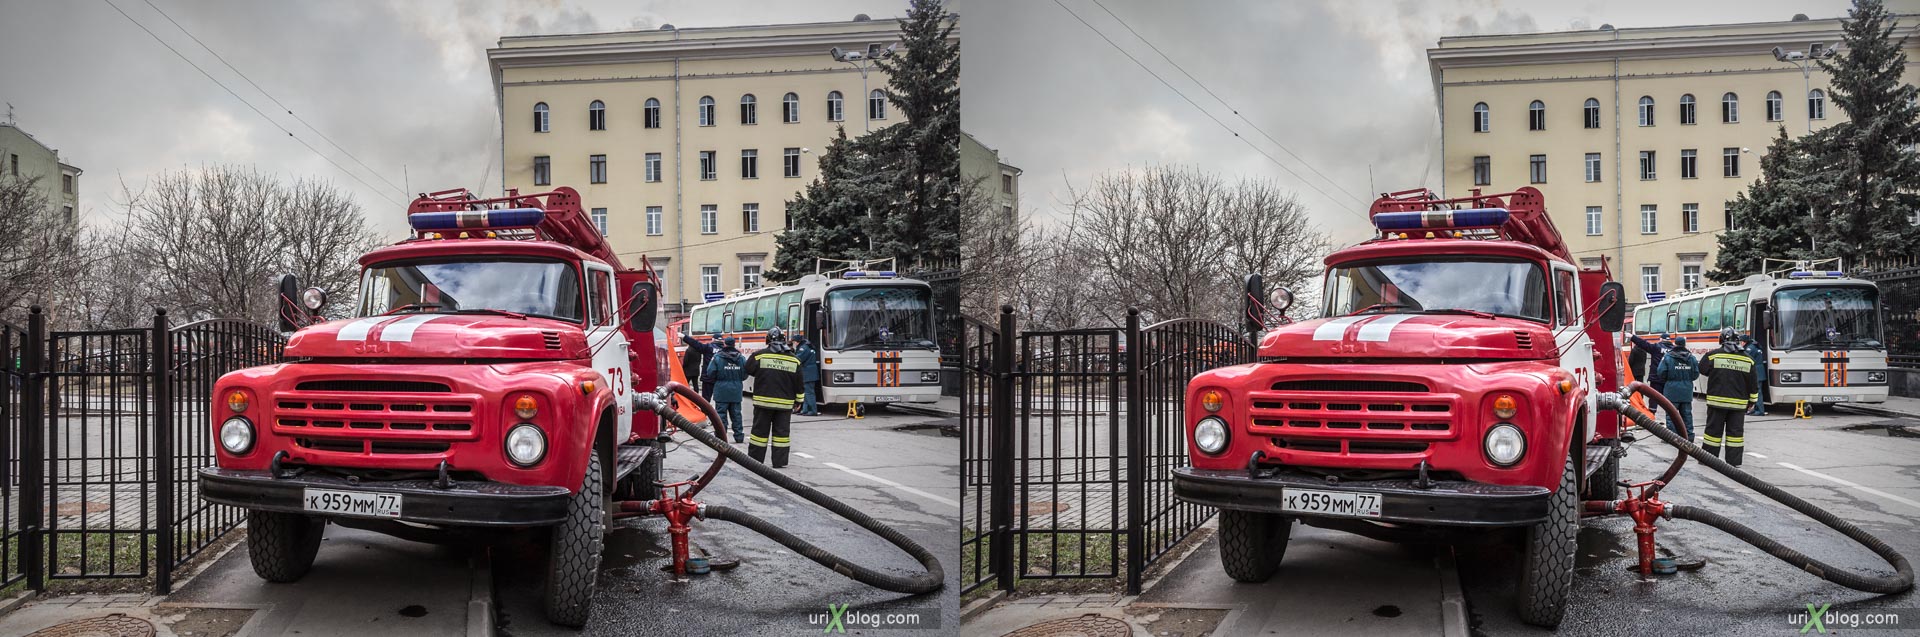 fire, smoke, accident, Ministry of Defense building, Bolshoy Znamensky Lane, Moscow, Russia, city, 3D, stereo pair, cross-eyed, crossview, cross view stereo pair, stereoscopic, 2016